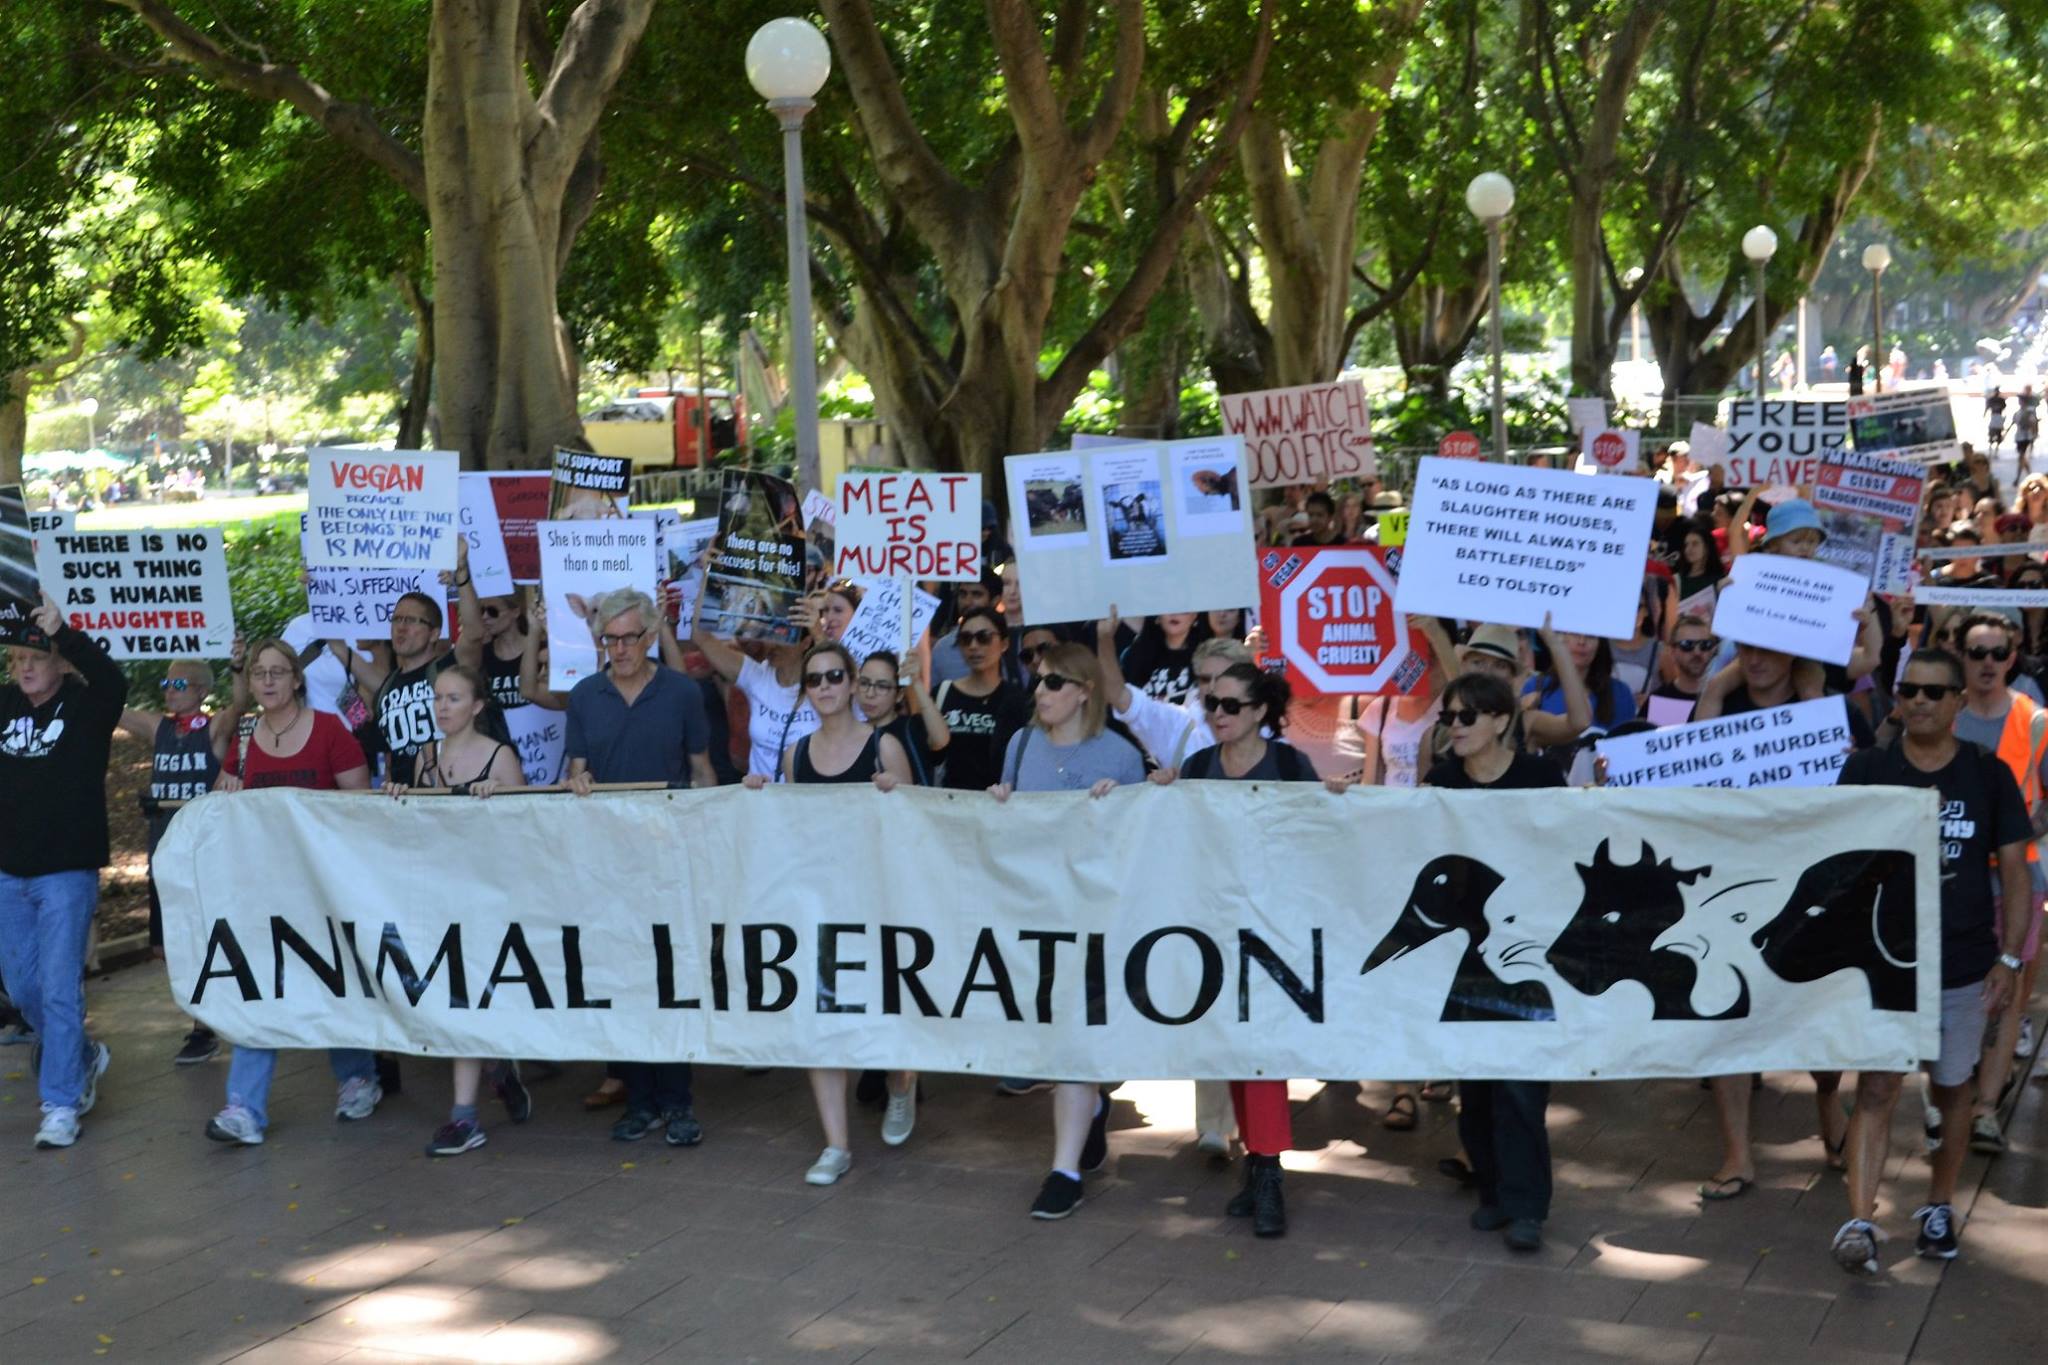 Sydney March To Close All Slaughterhouses 2017 picture